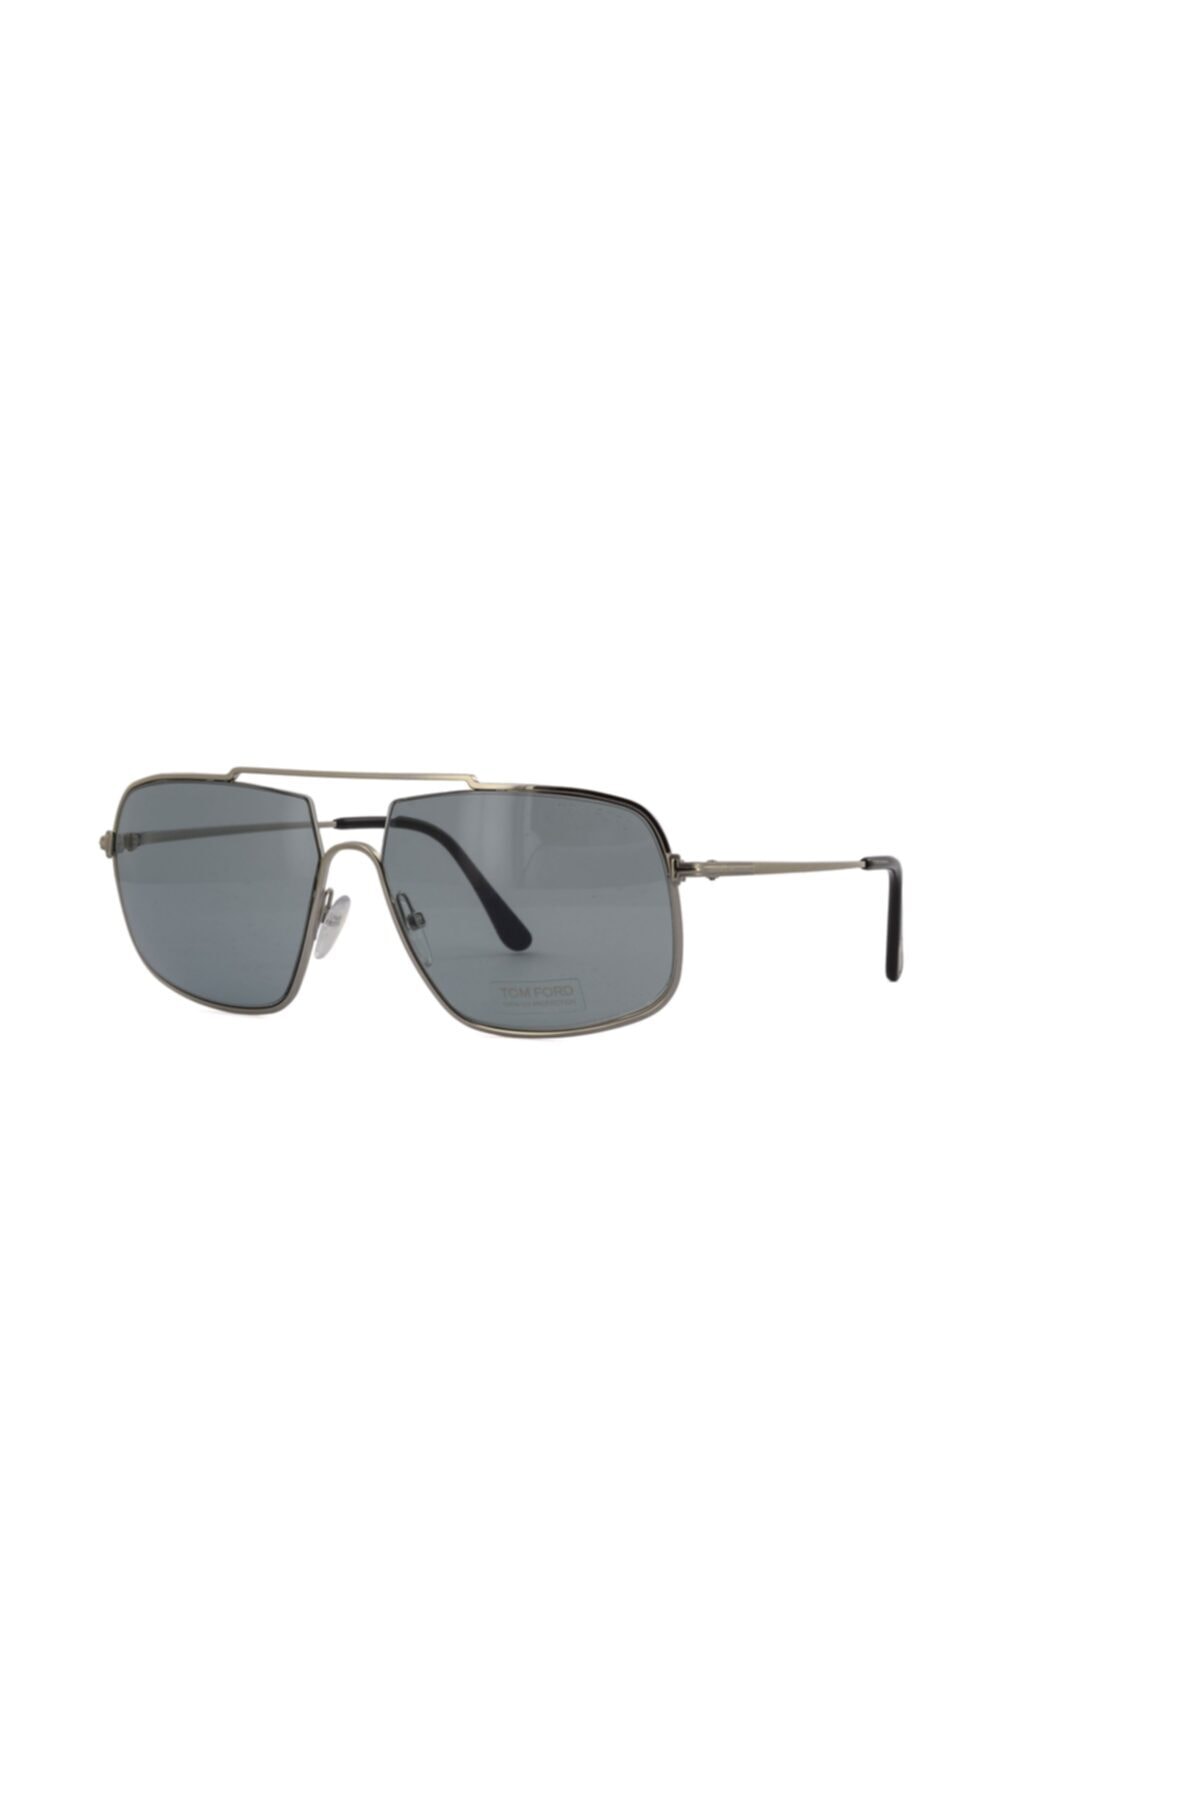 Tom Ford AJDEN-02 TF585 16A 60